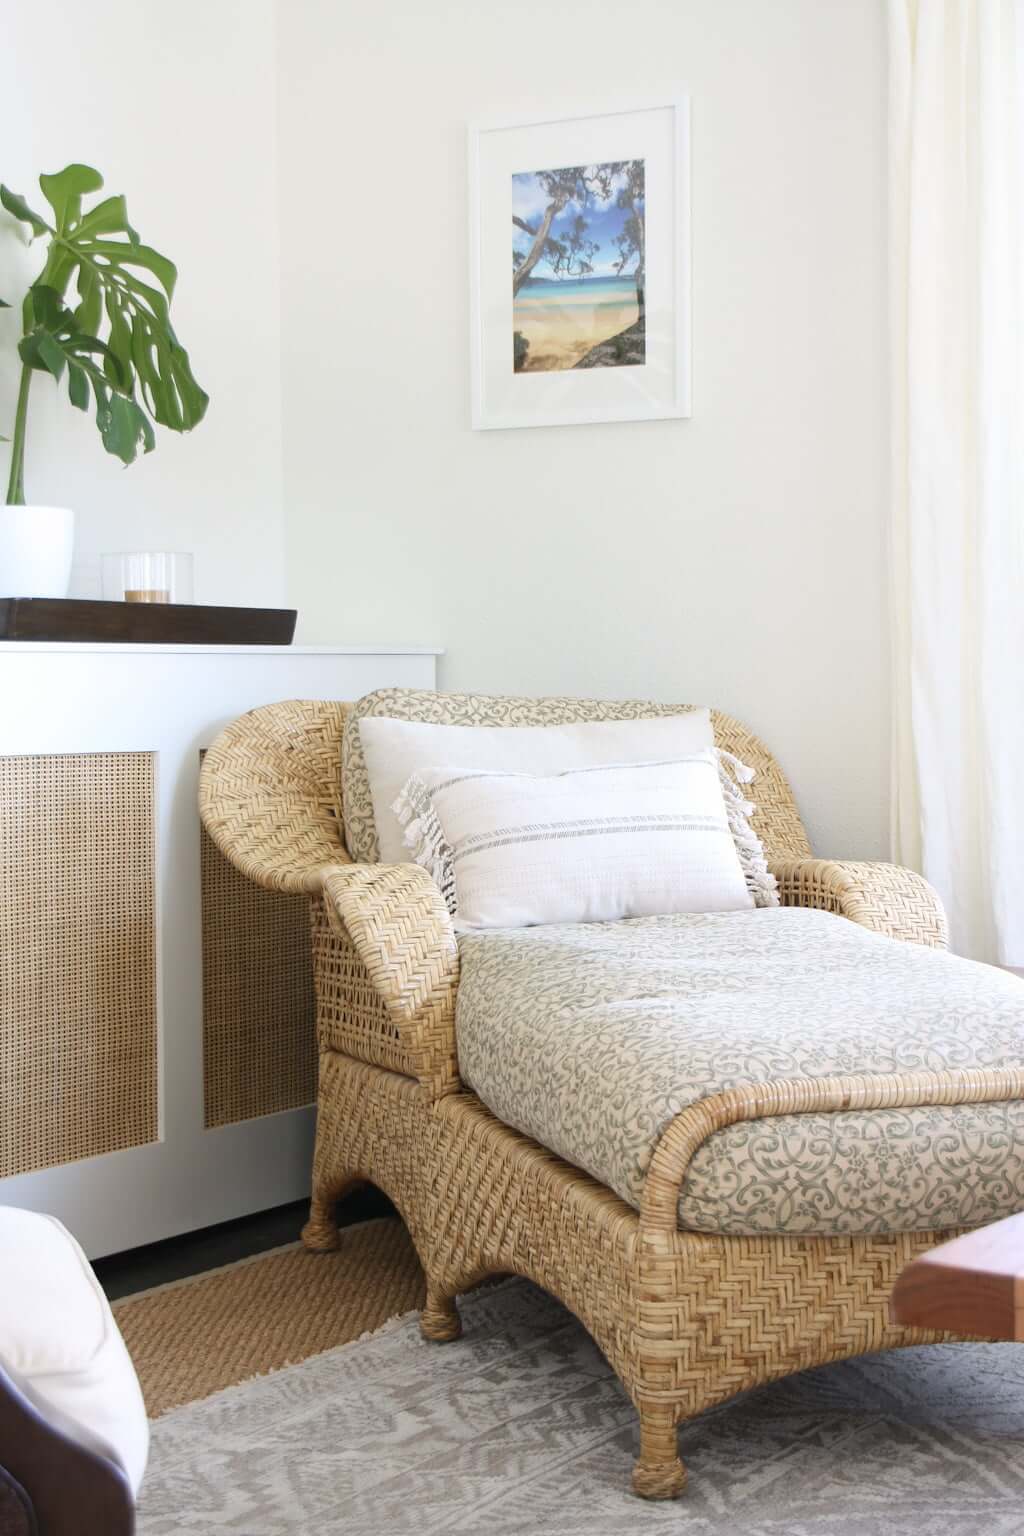 woven chaise with hidden tv cabinet behind it in corner